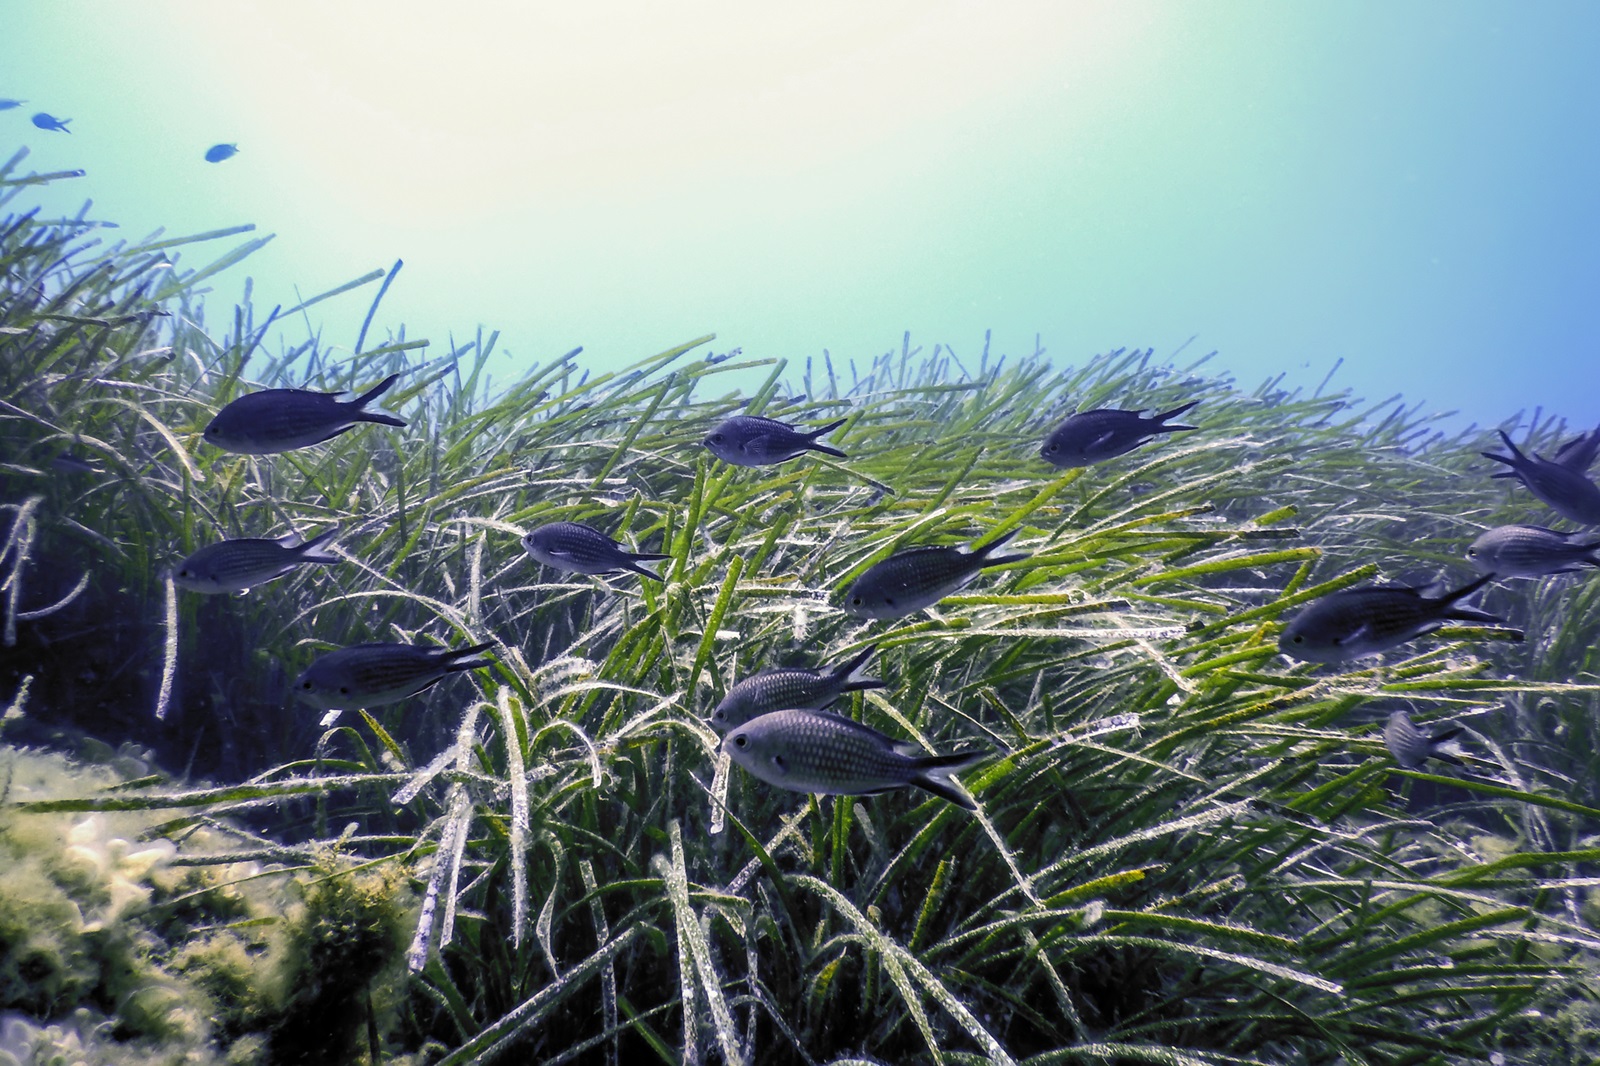 Riccardo Losciale | Overcoming Barriers to Protect Seagrass Meadows: A Critical Marine Ecosystem